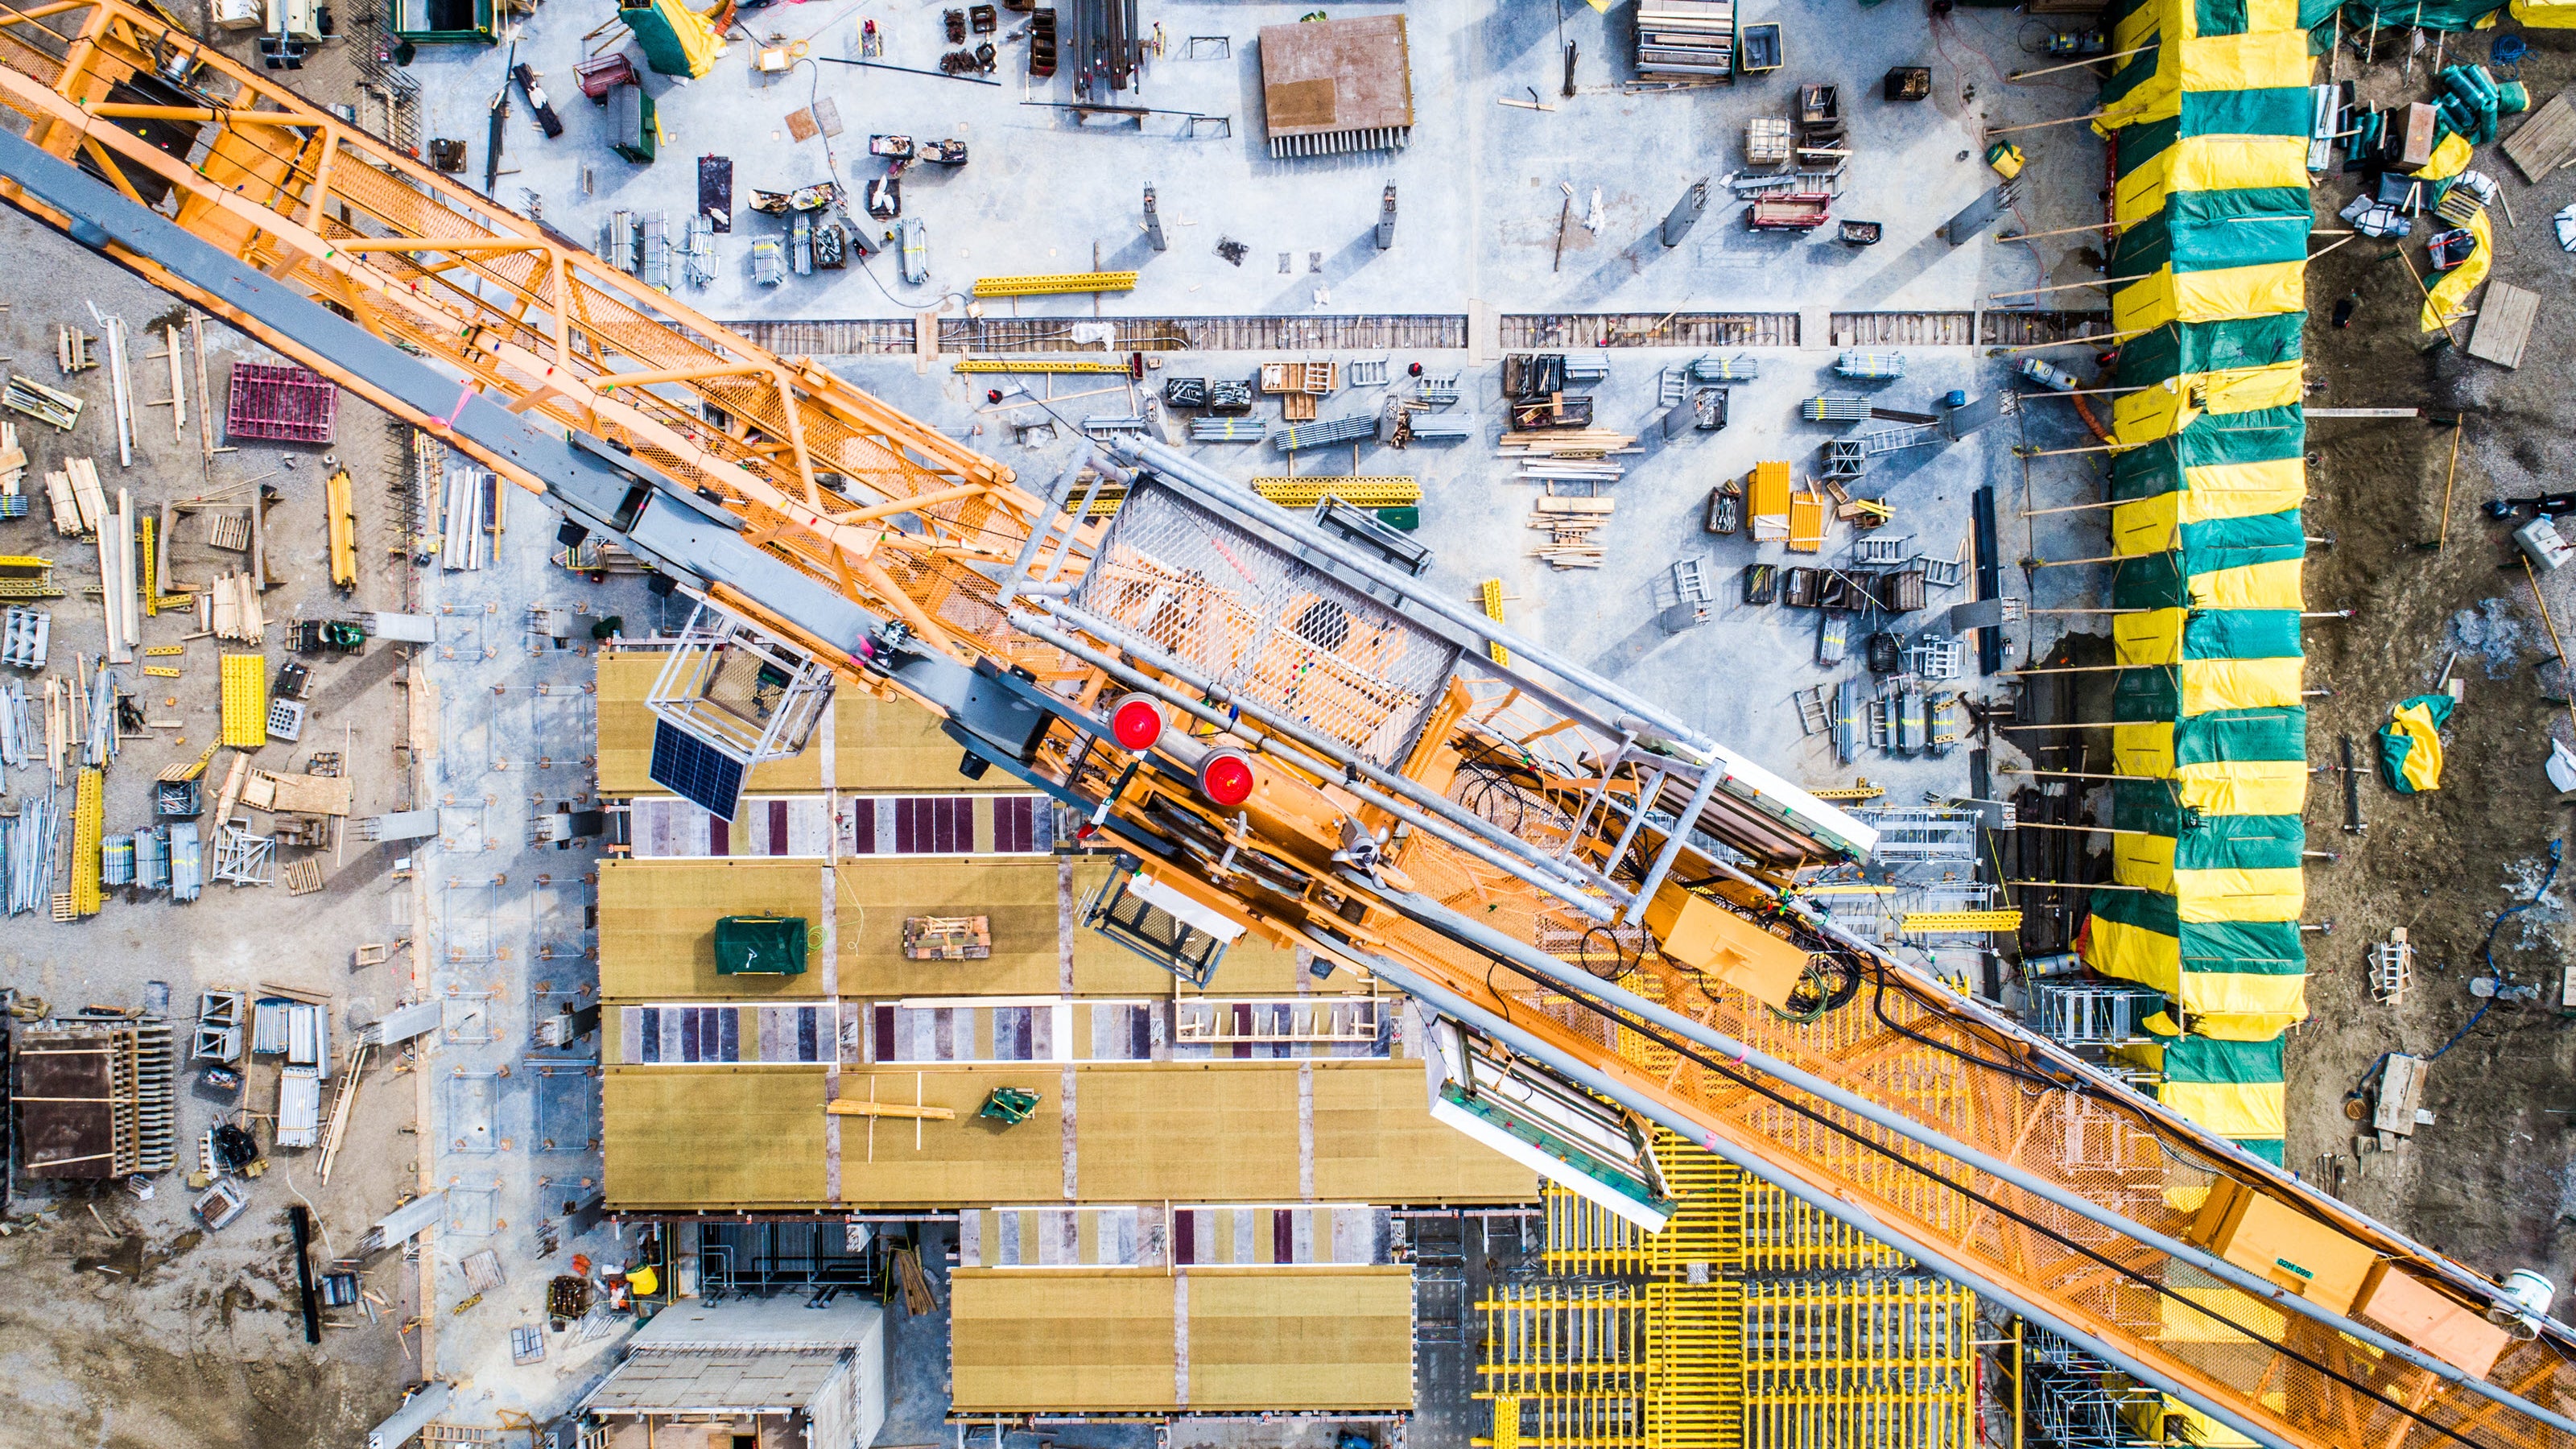 UK construction trends report: Exploring five key trends influencing the UK's construction market, and how those trends are impacting construction insurance risks.